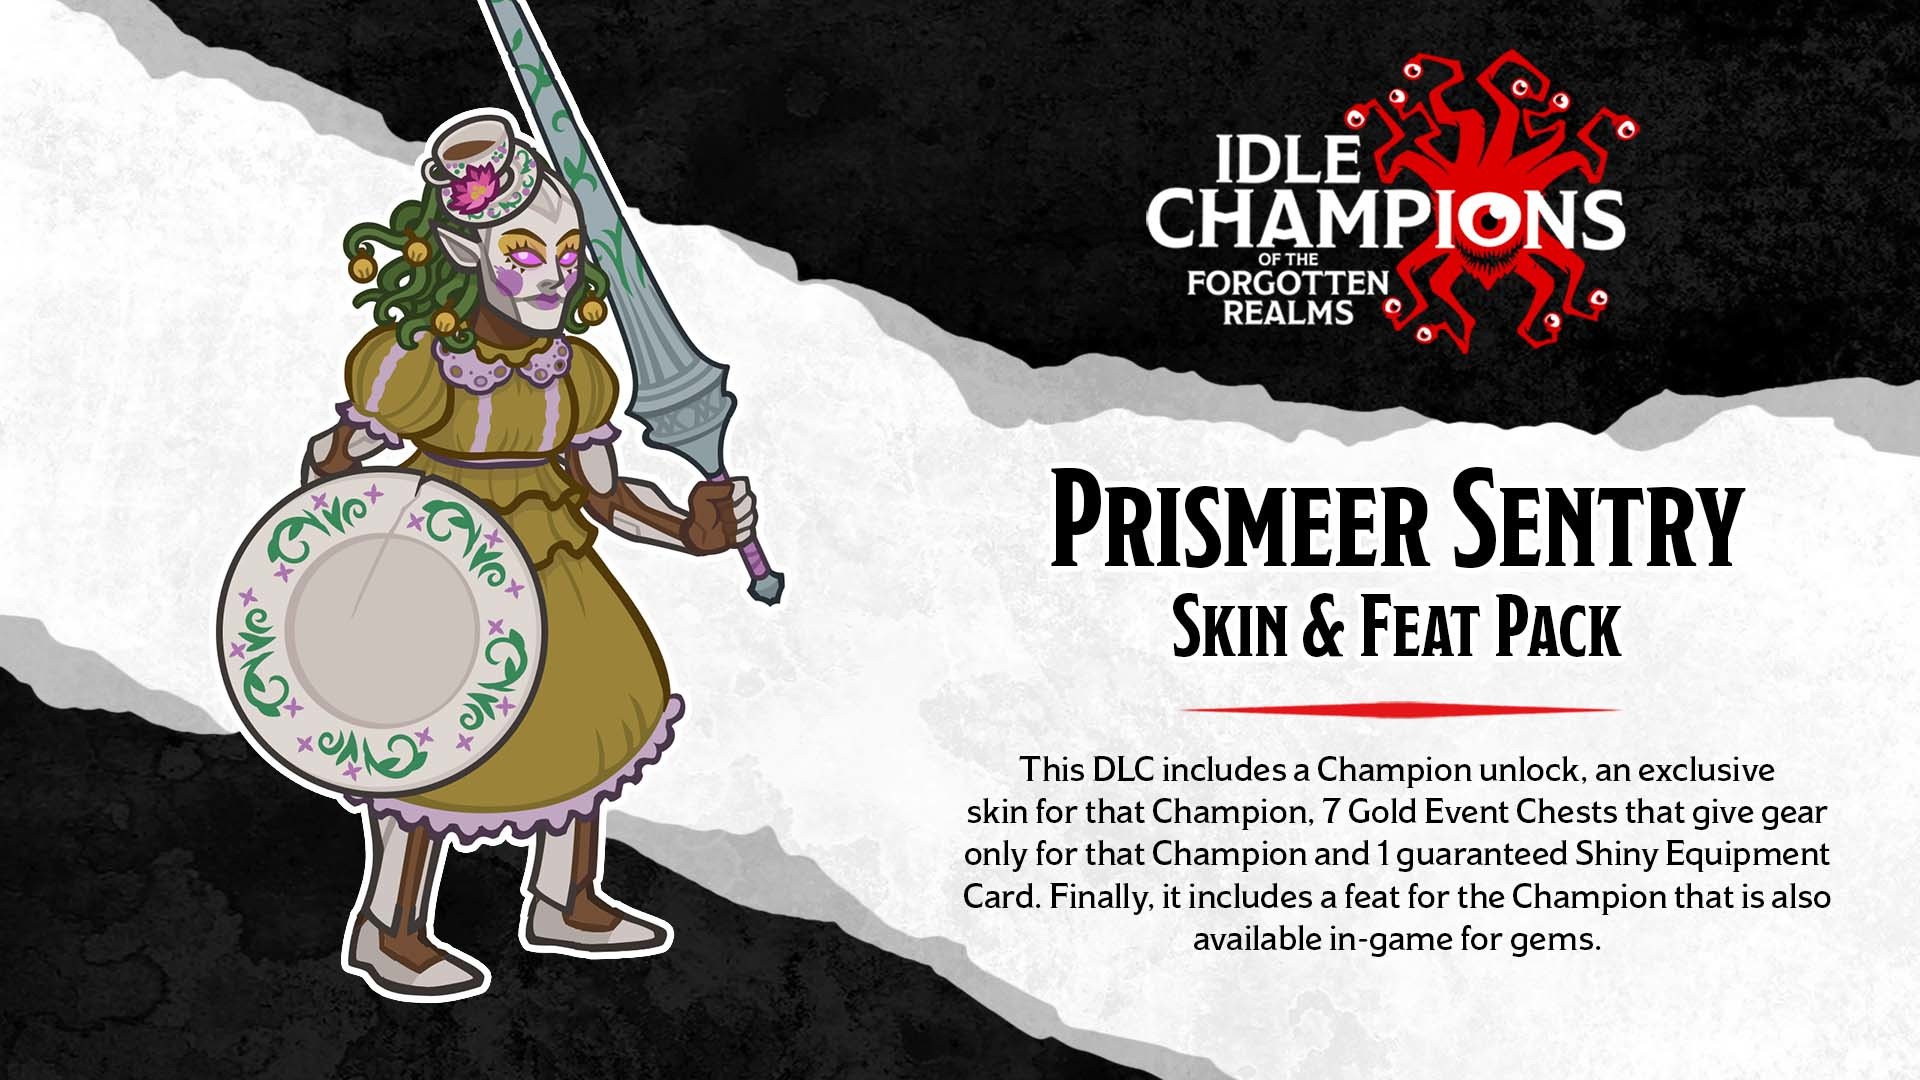 Idle Champions - Prismeer Sentry Skin & Feat Pack DLC Steam CD Key [USD 1.05]